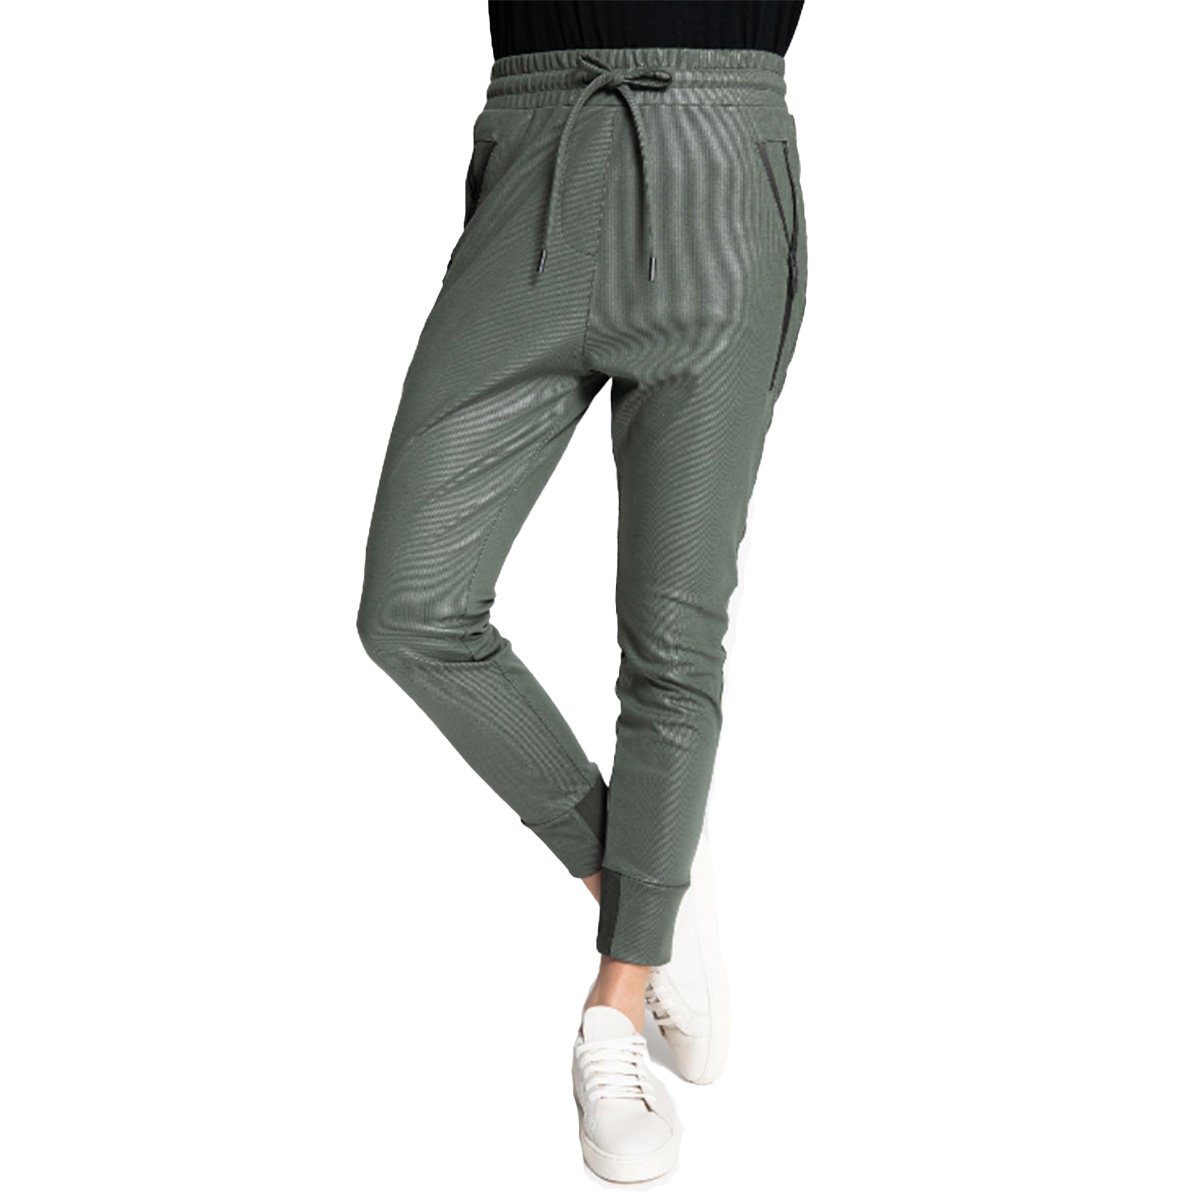 Zhrill Jogger Pants Fabia olive